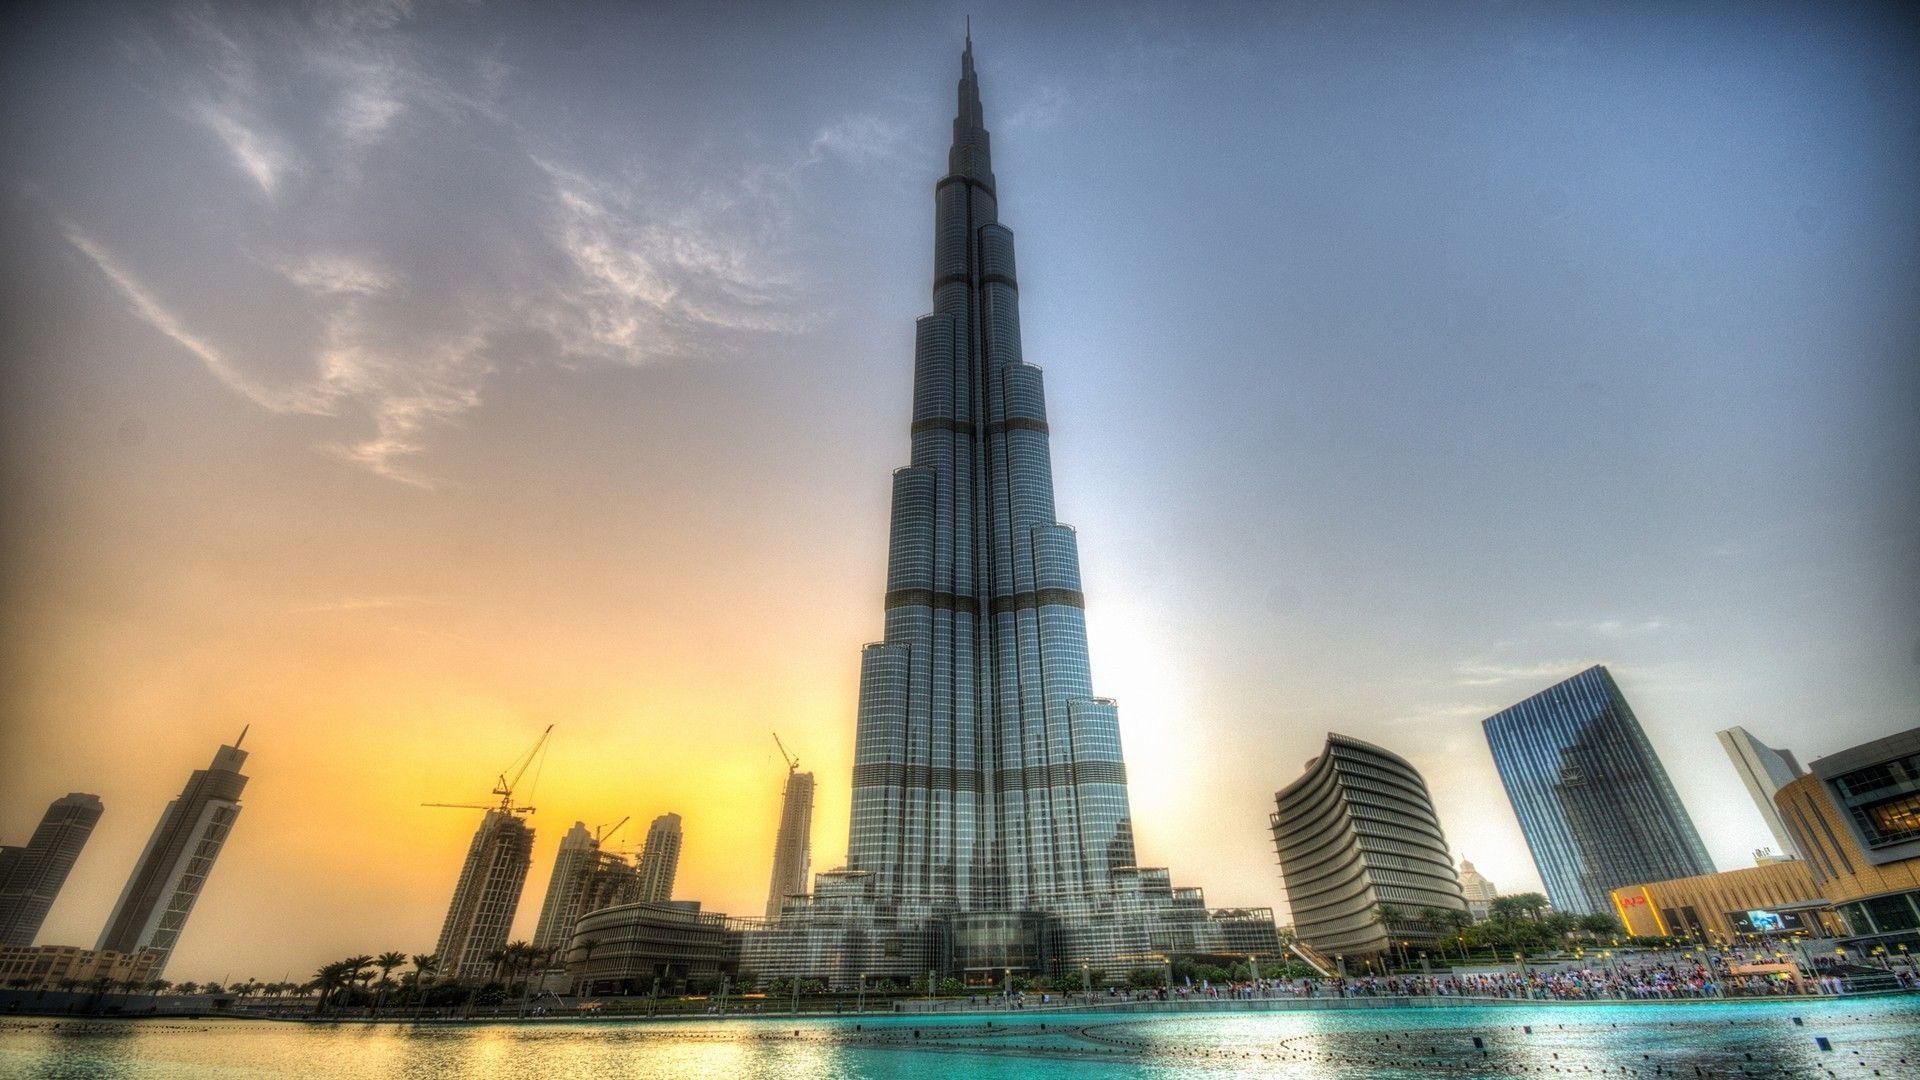 Search luxury property in Dubai at AUM Real Estate #property